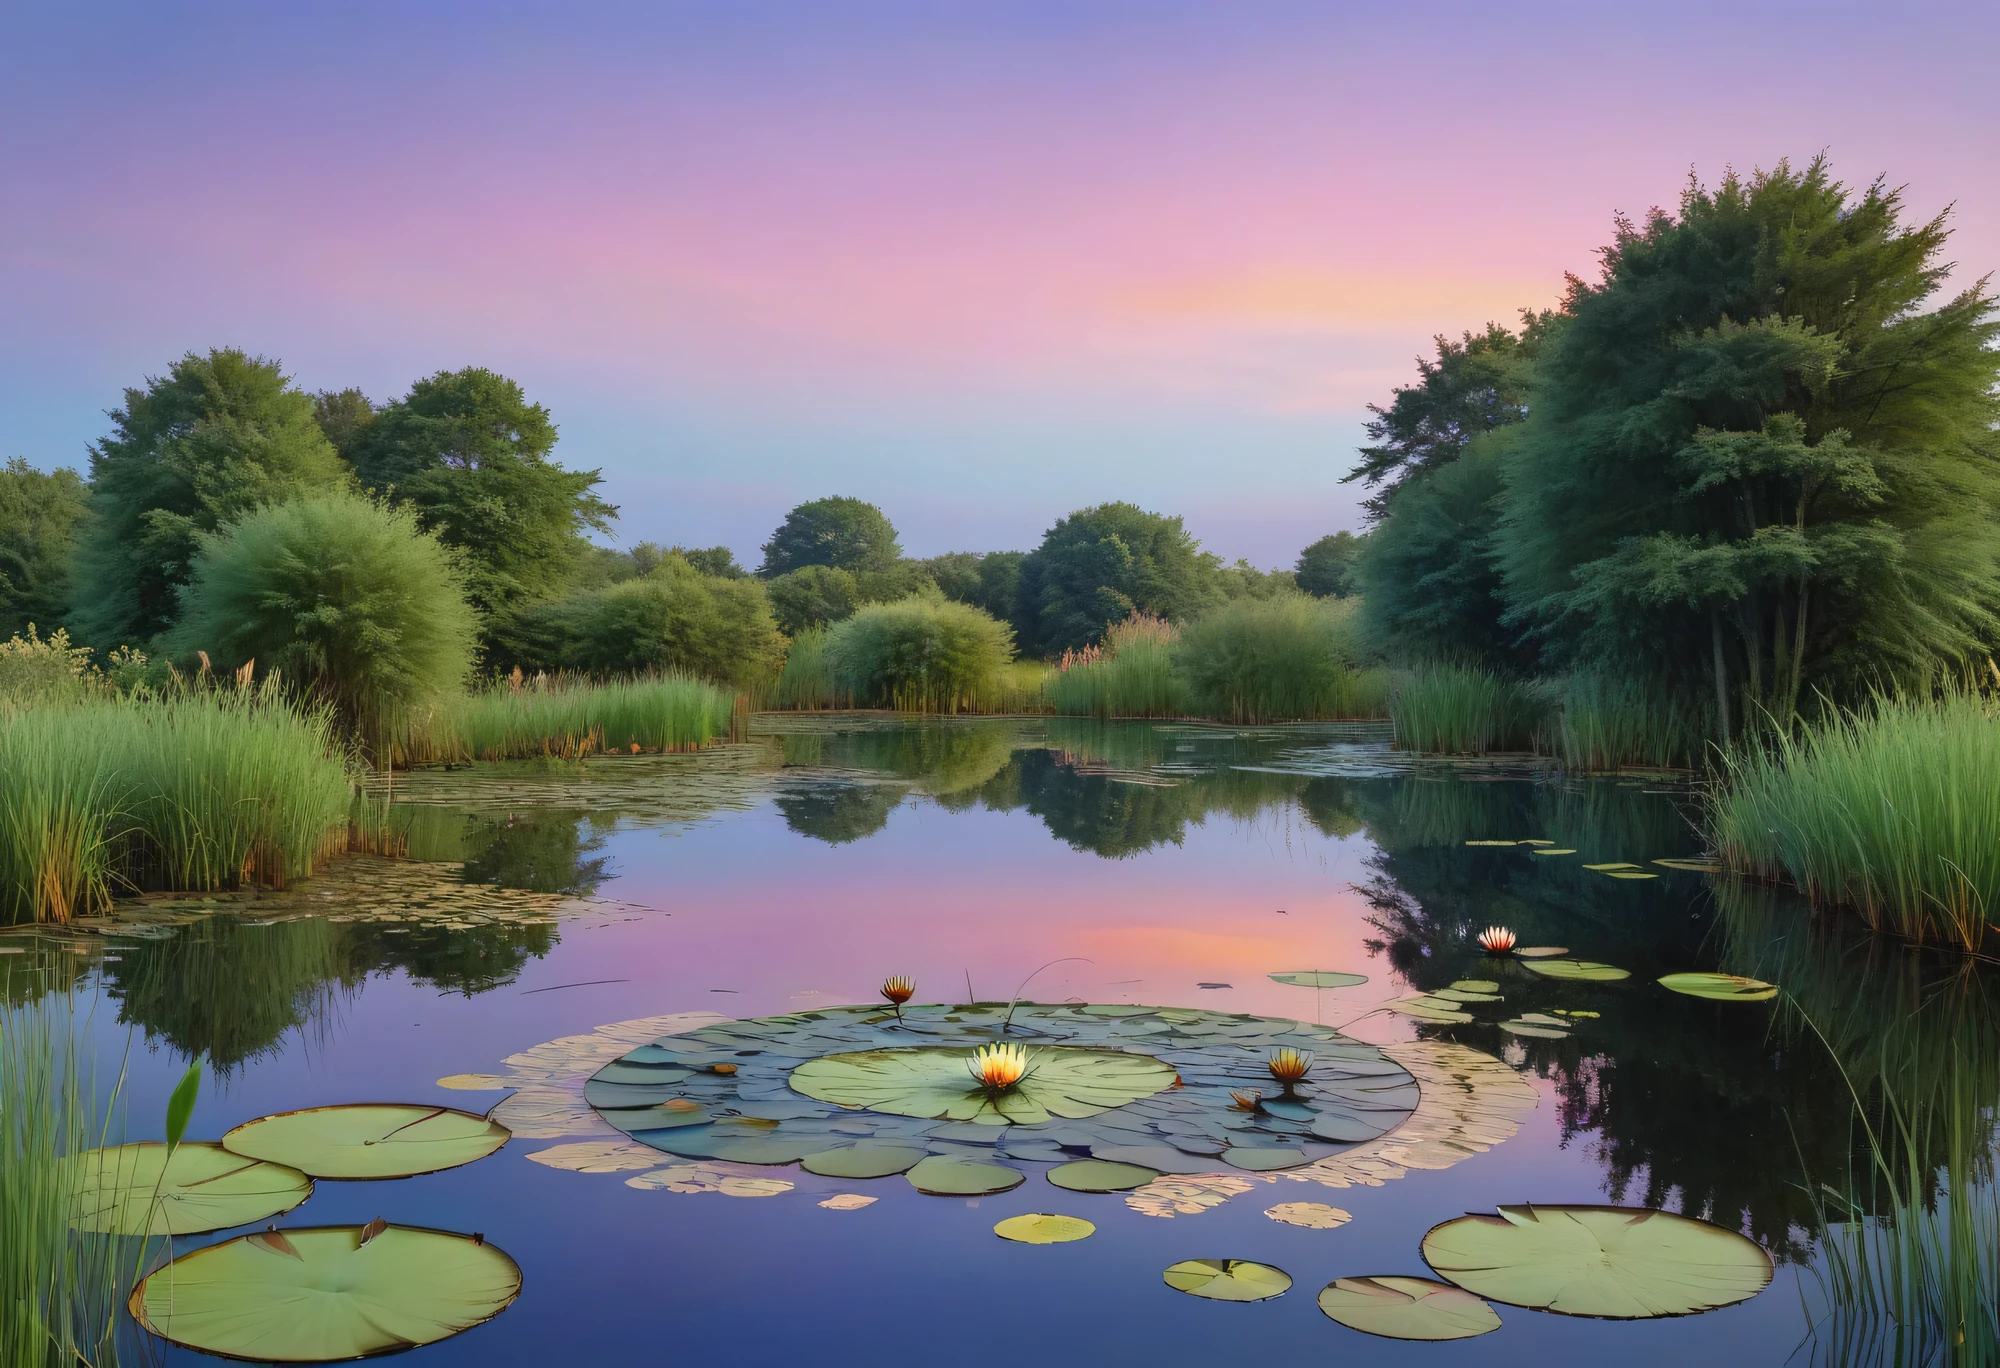 A beautiful evening pond in evening colors, thickets of sedges and water lilies, the evening sky is reflected in the mirrored surface of the pond, a bird's nest floats in the center of the pond, an evening pond, mosquitoes, dragonflies, a palette of evening colors, quiet, calm, beautiful, the image is shown in detail, 32k, imitation of the Ridgeway Knight style. artistic image